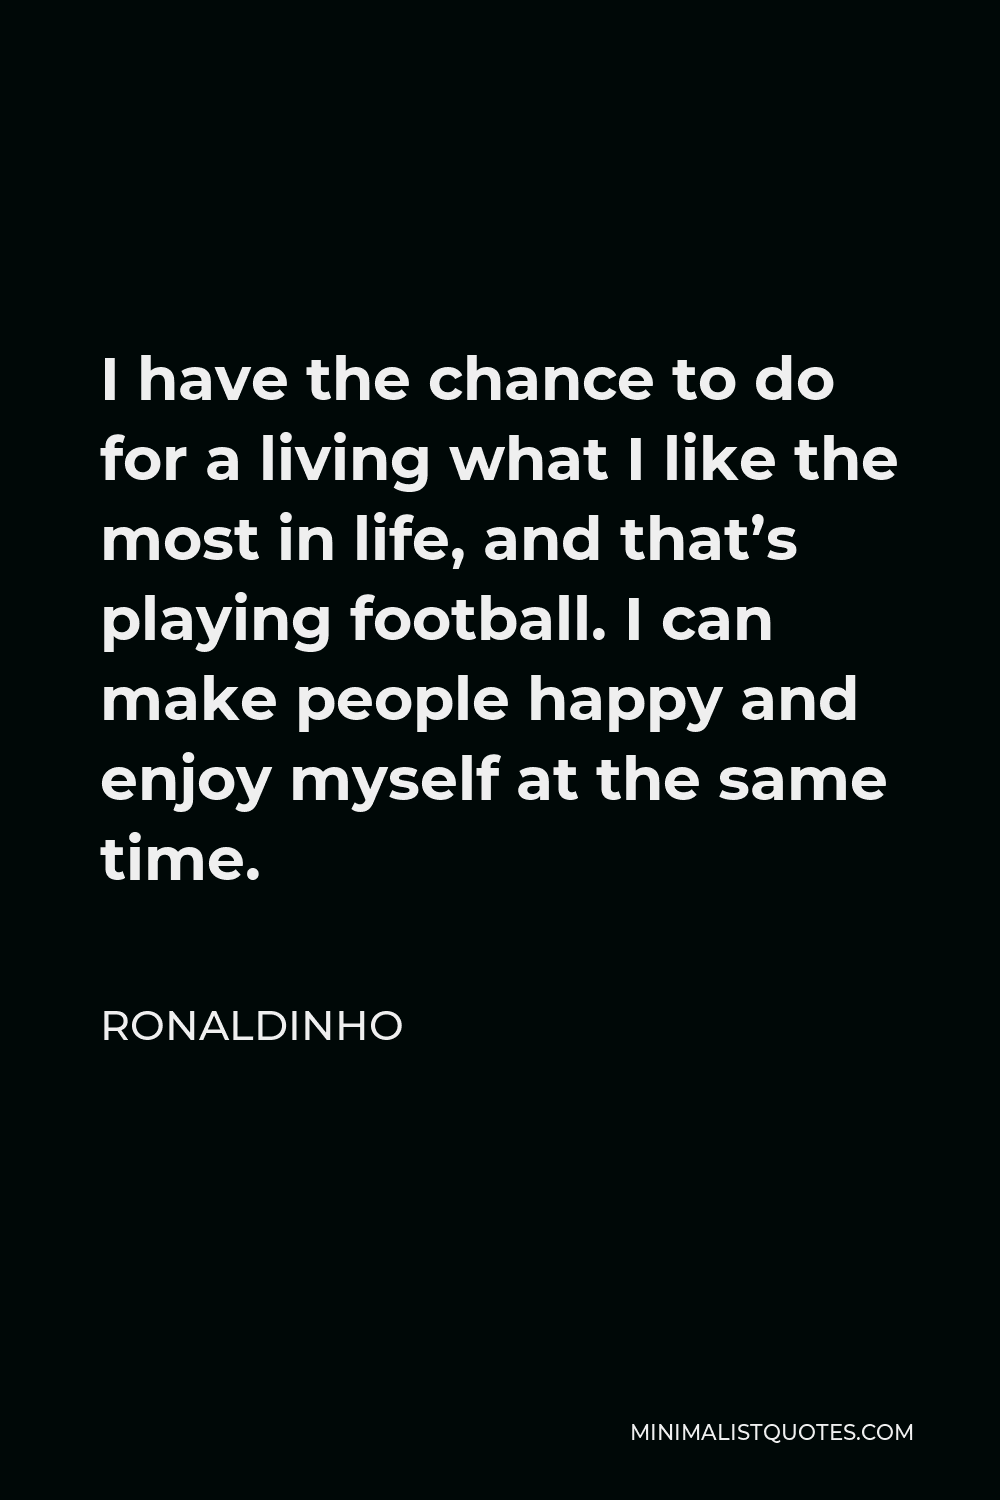 Ronaldinho Quote - I have the chance to do for a living what I like the most in life, and that’s playing football. I can make people happy and enjoy myself at the same time.